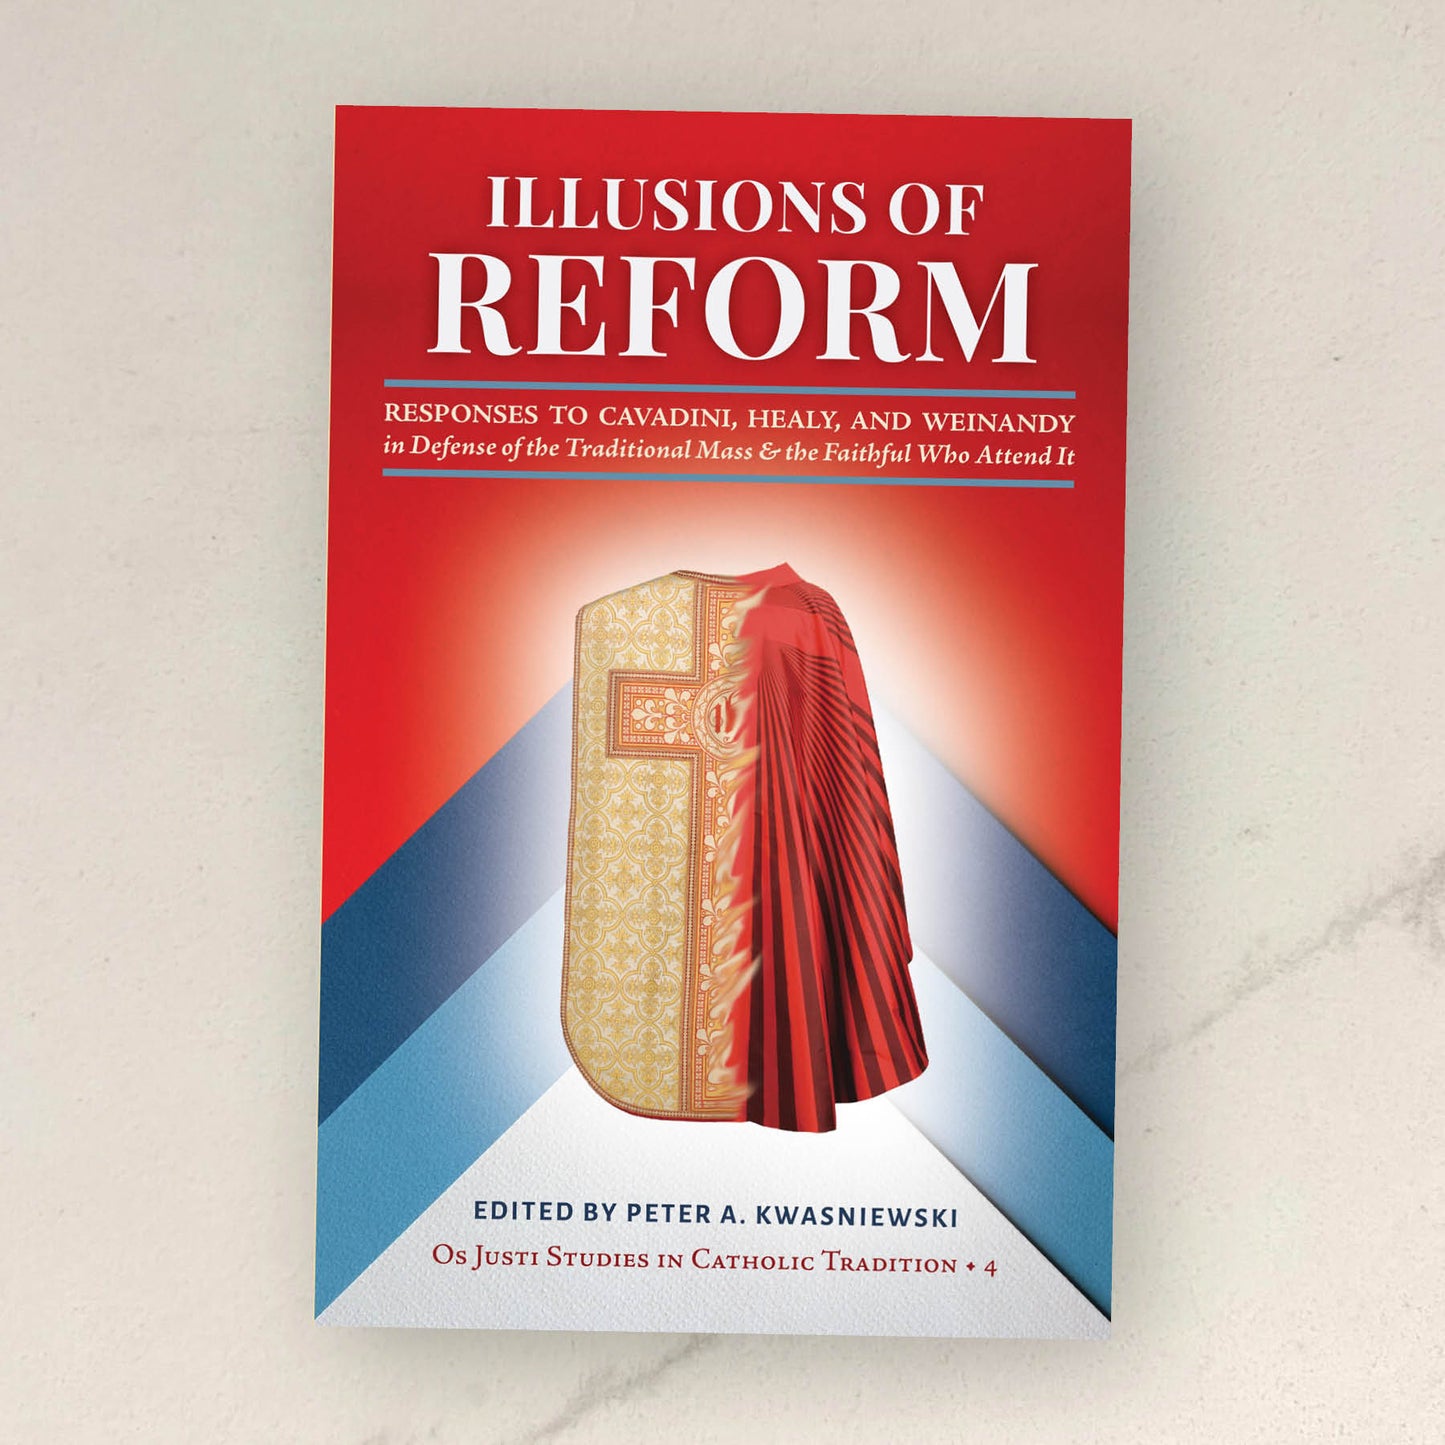 Illusions of Reform: Responses to Cavadini, Healy, and Weinandy in Defense of the Traditional Mass